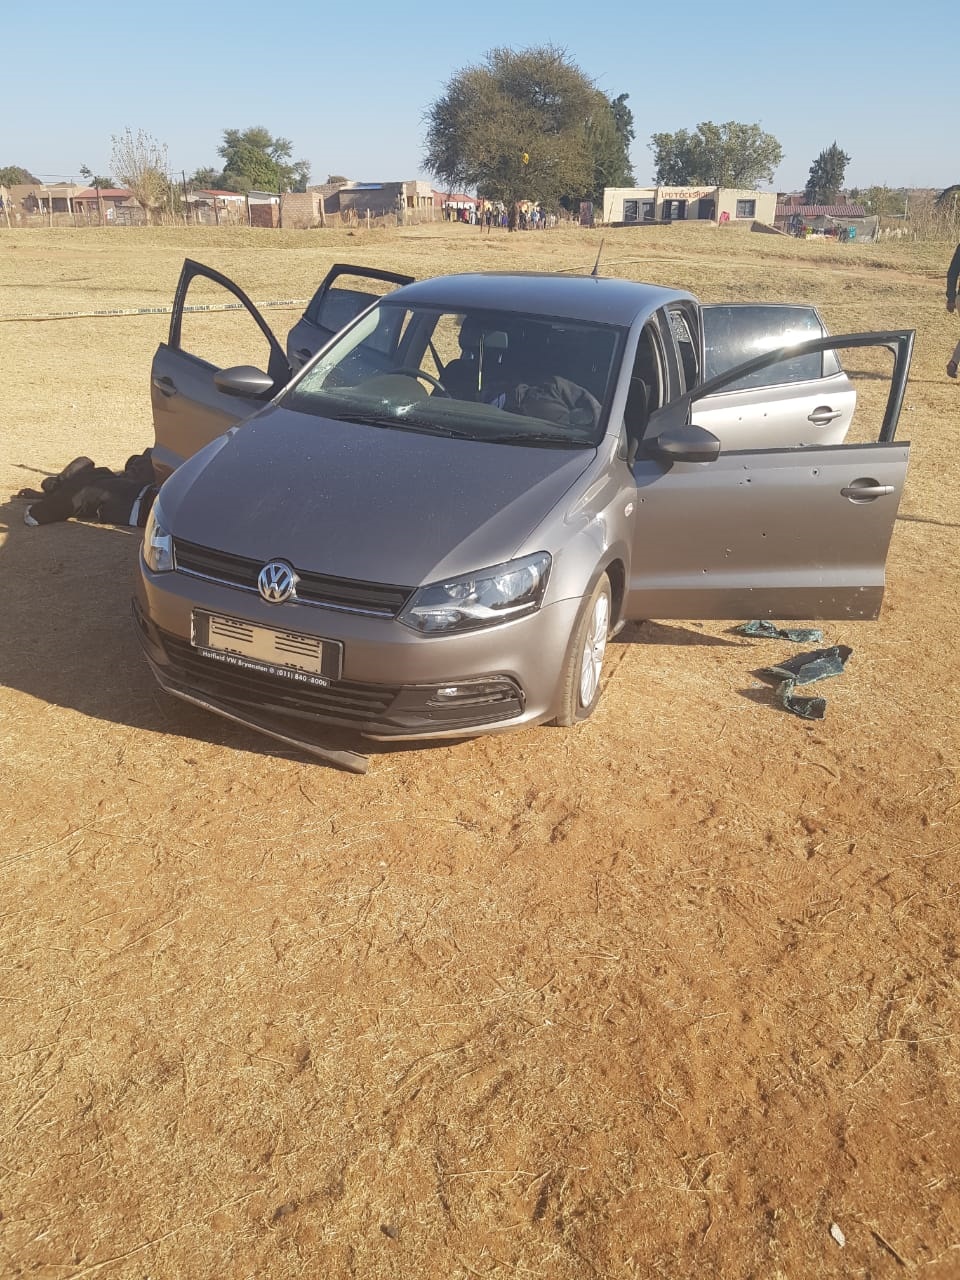 A VW Polo used as a getaway car by some of the suspects stopped in Mapyane village as cops returned fire during a shootout incident.